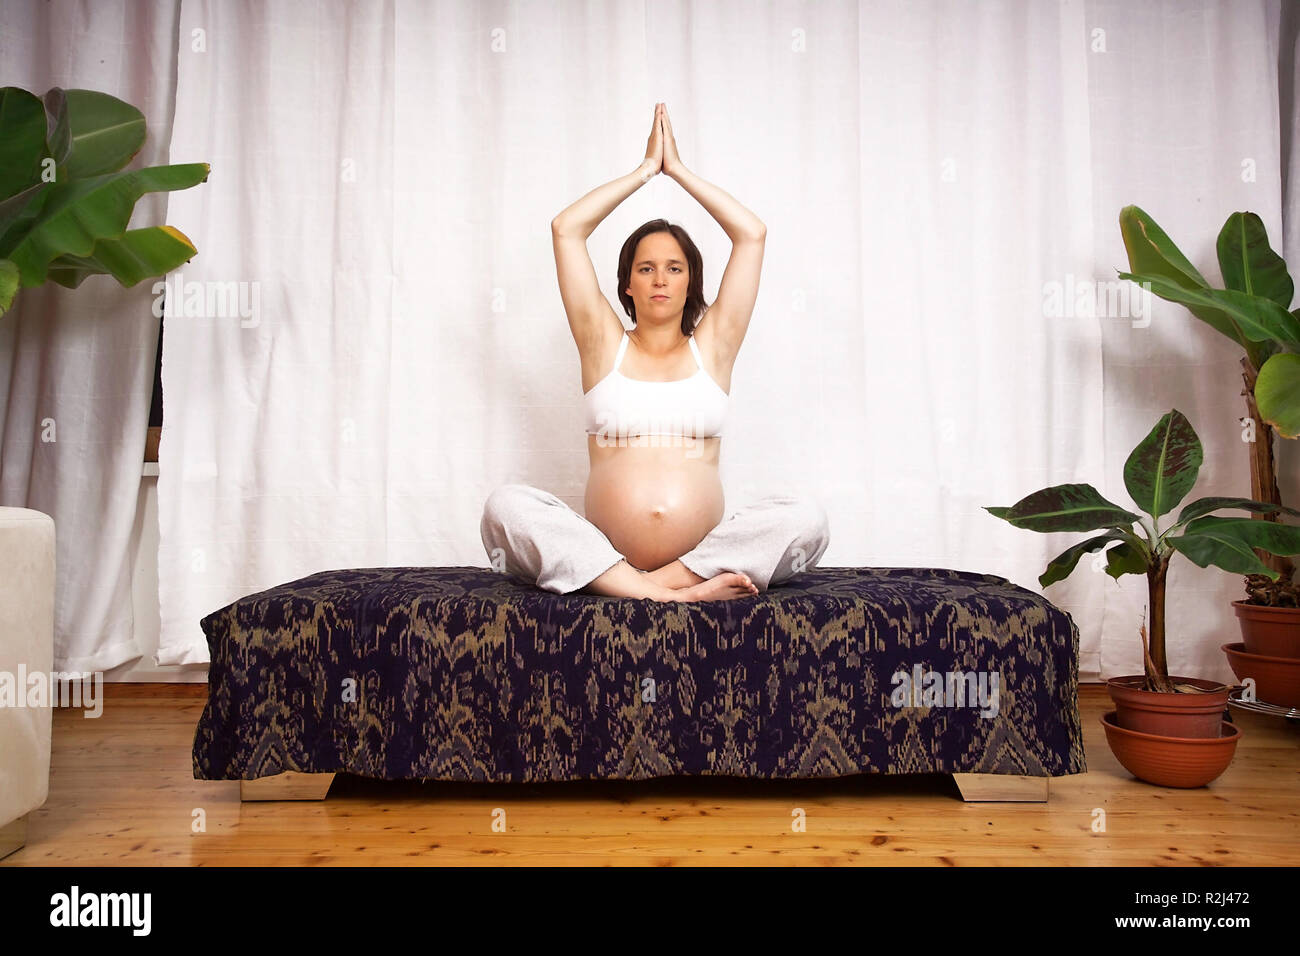 yoga on couch Stock Photo